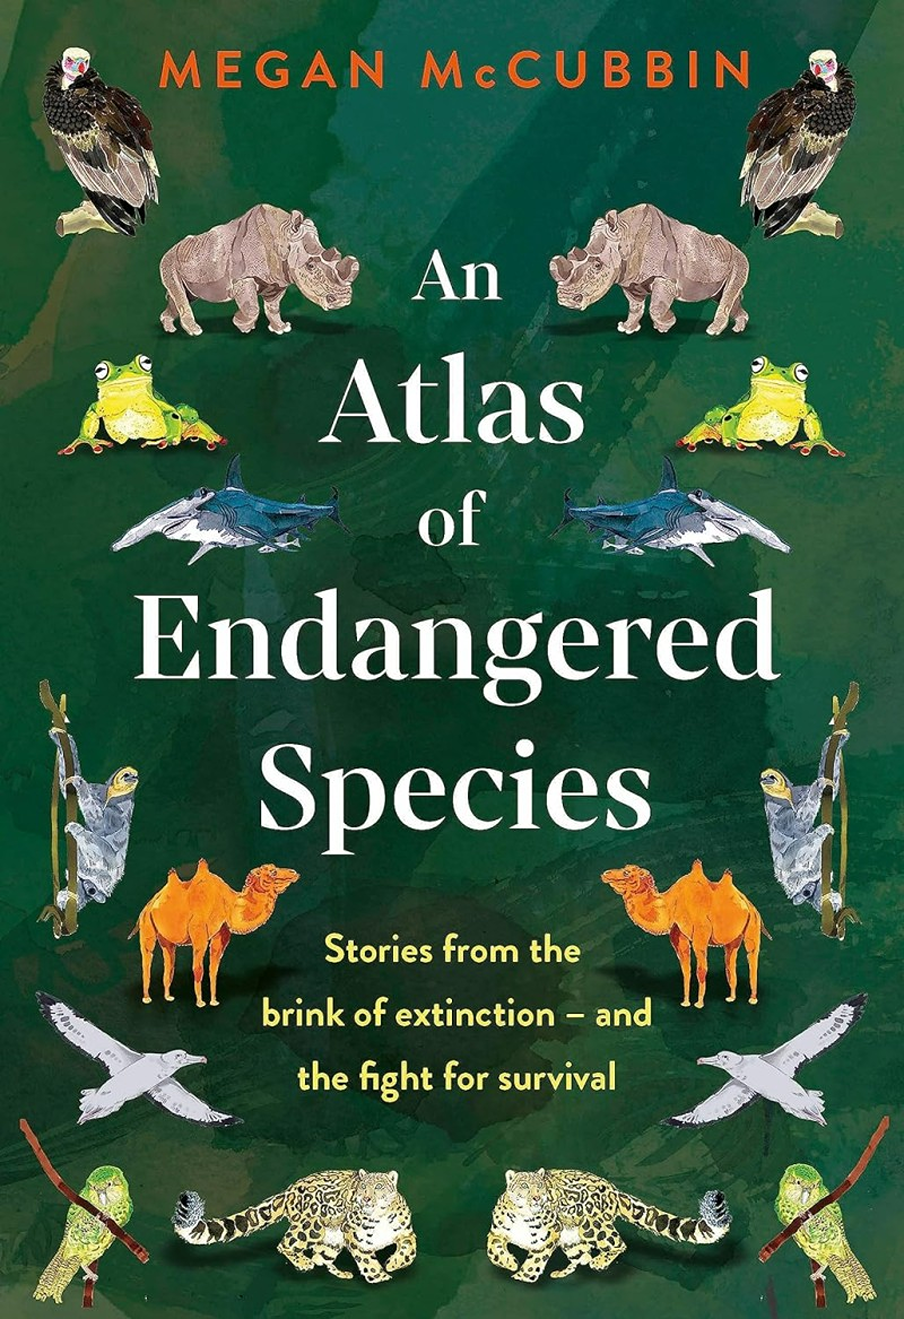 good books to help save endangered species